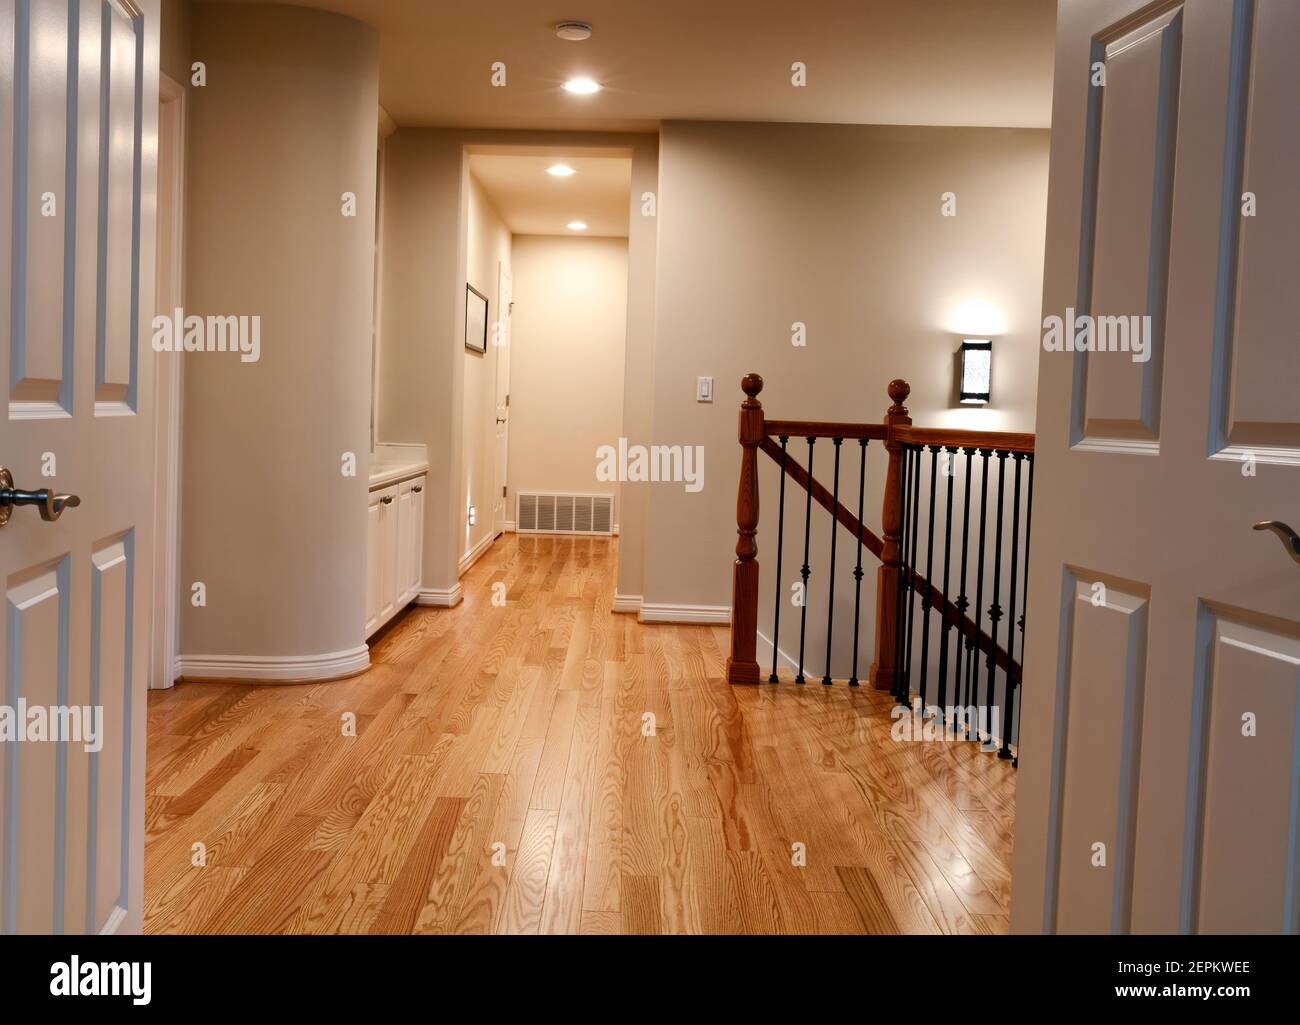 Newly installed red oak hardwood floors in home Stock Photo